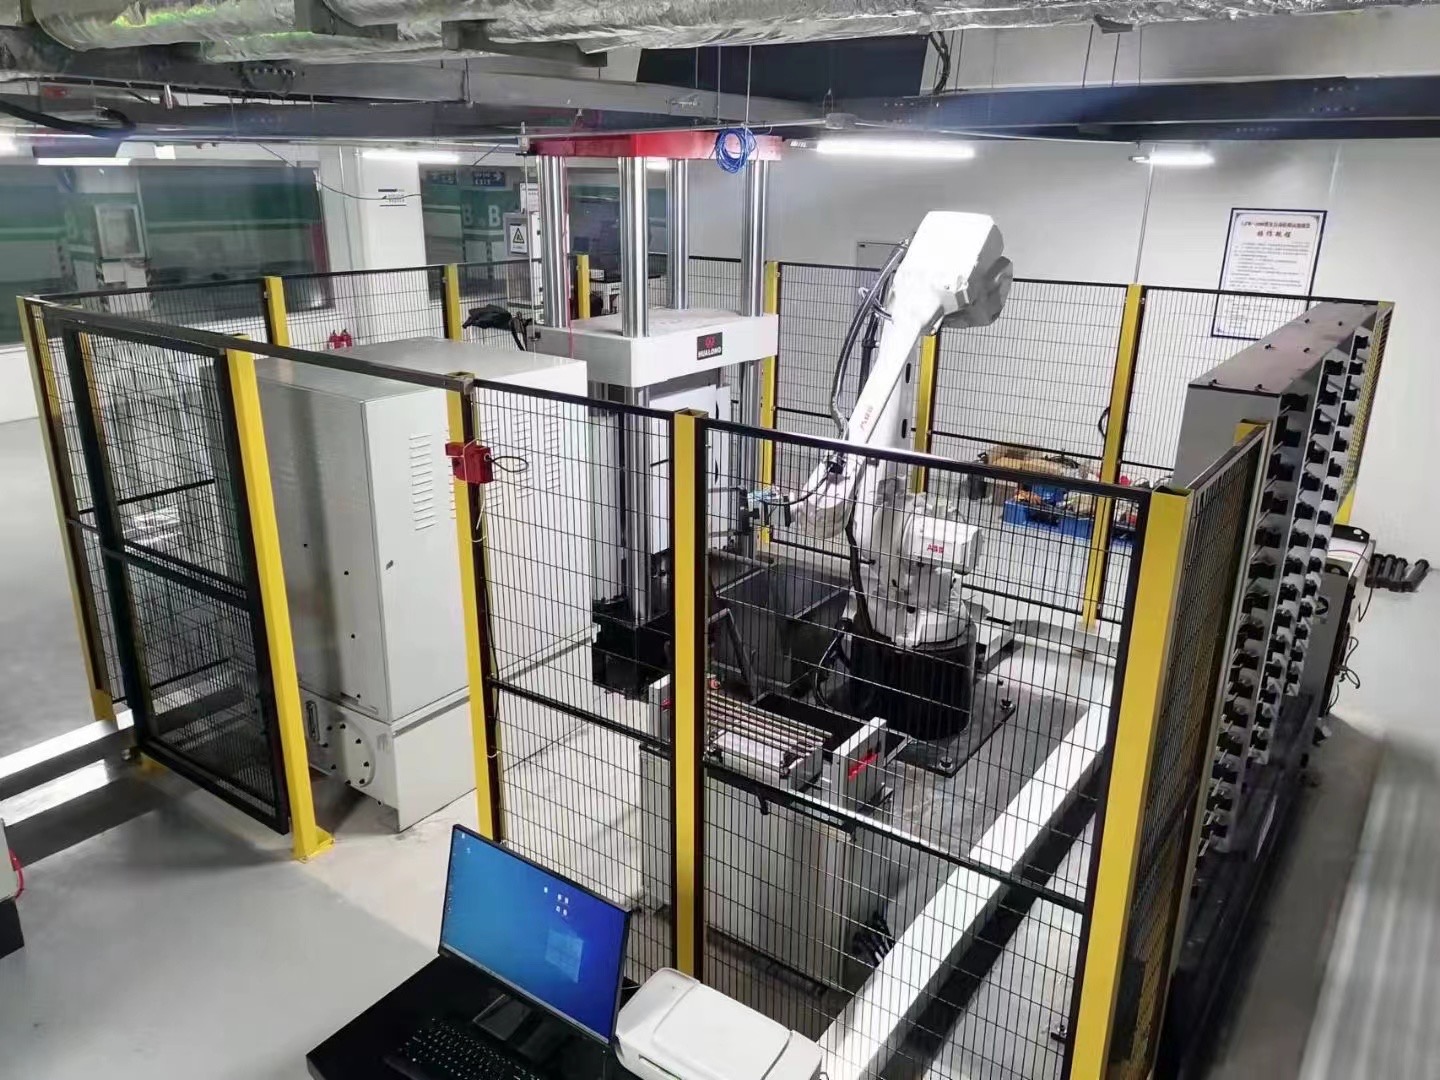 200/300/500/600kN Robot Robotic Automatic Tensile Testing Systems